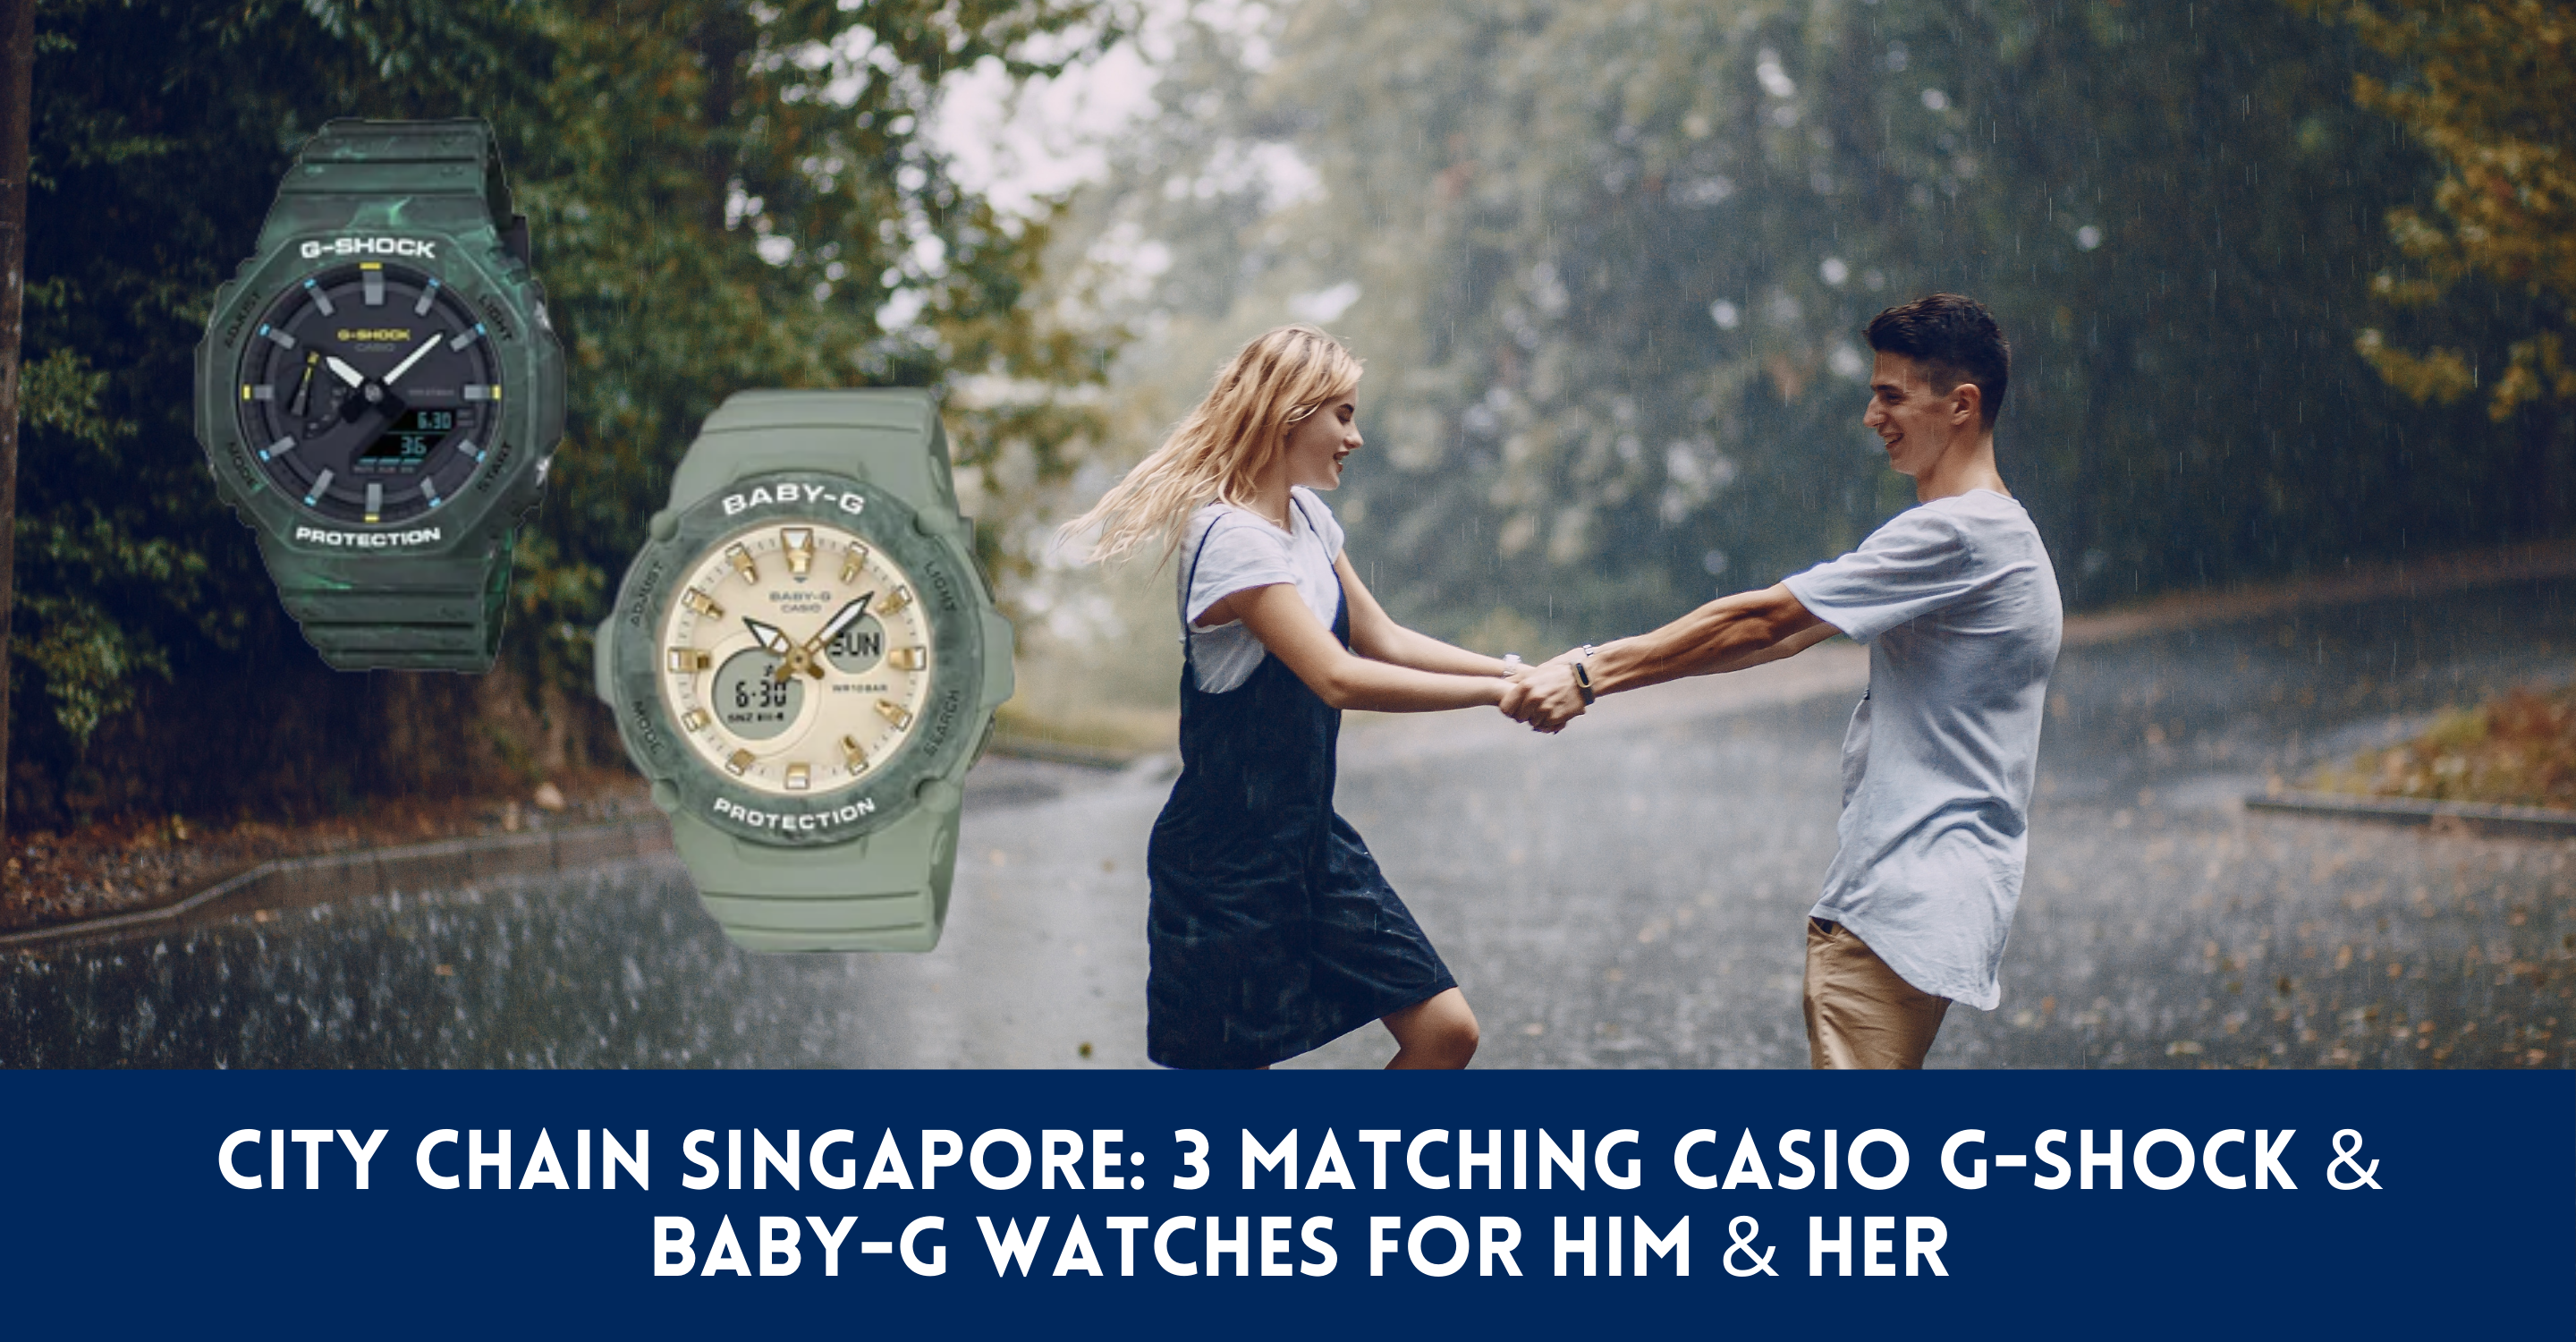 3 Him For & Chain Baby-G & G-Shock Matching CASIO Her Watches Singapore – City